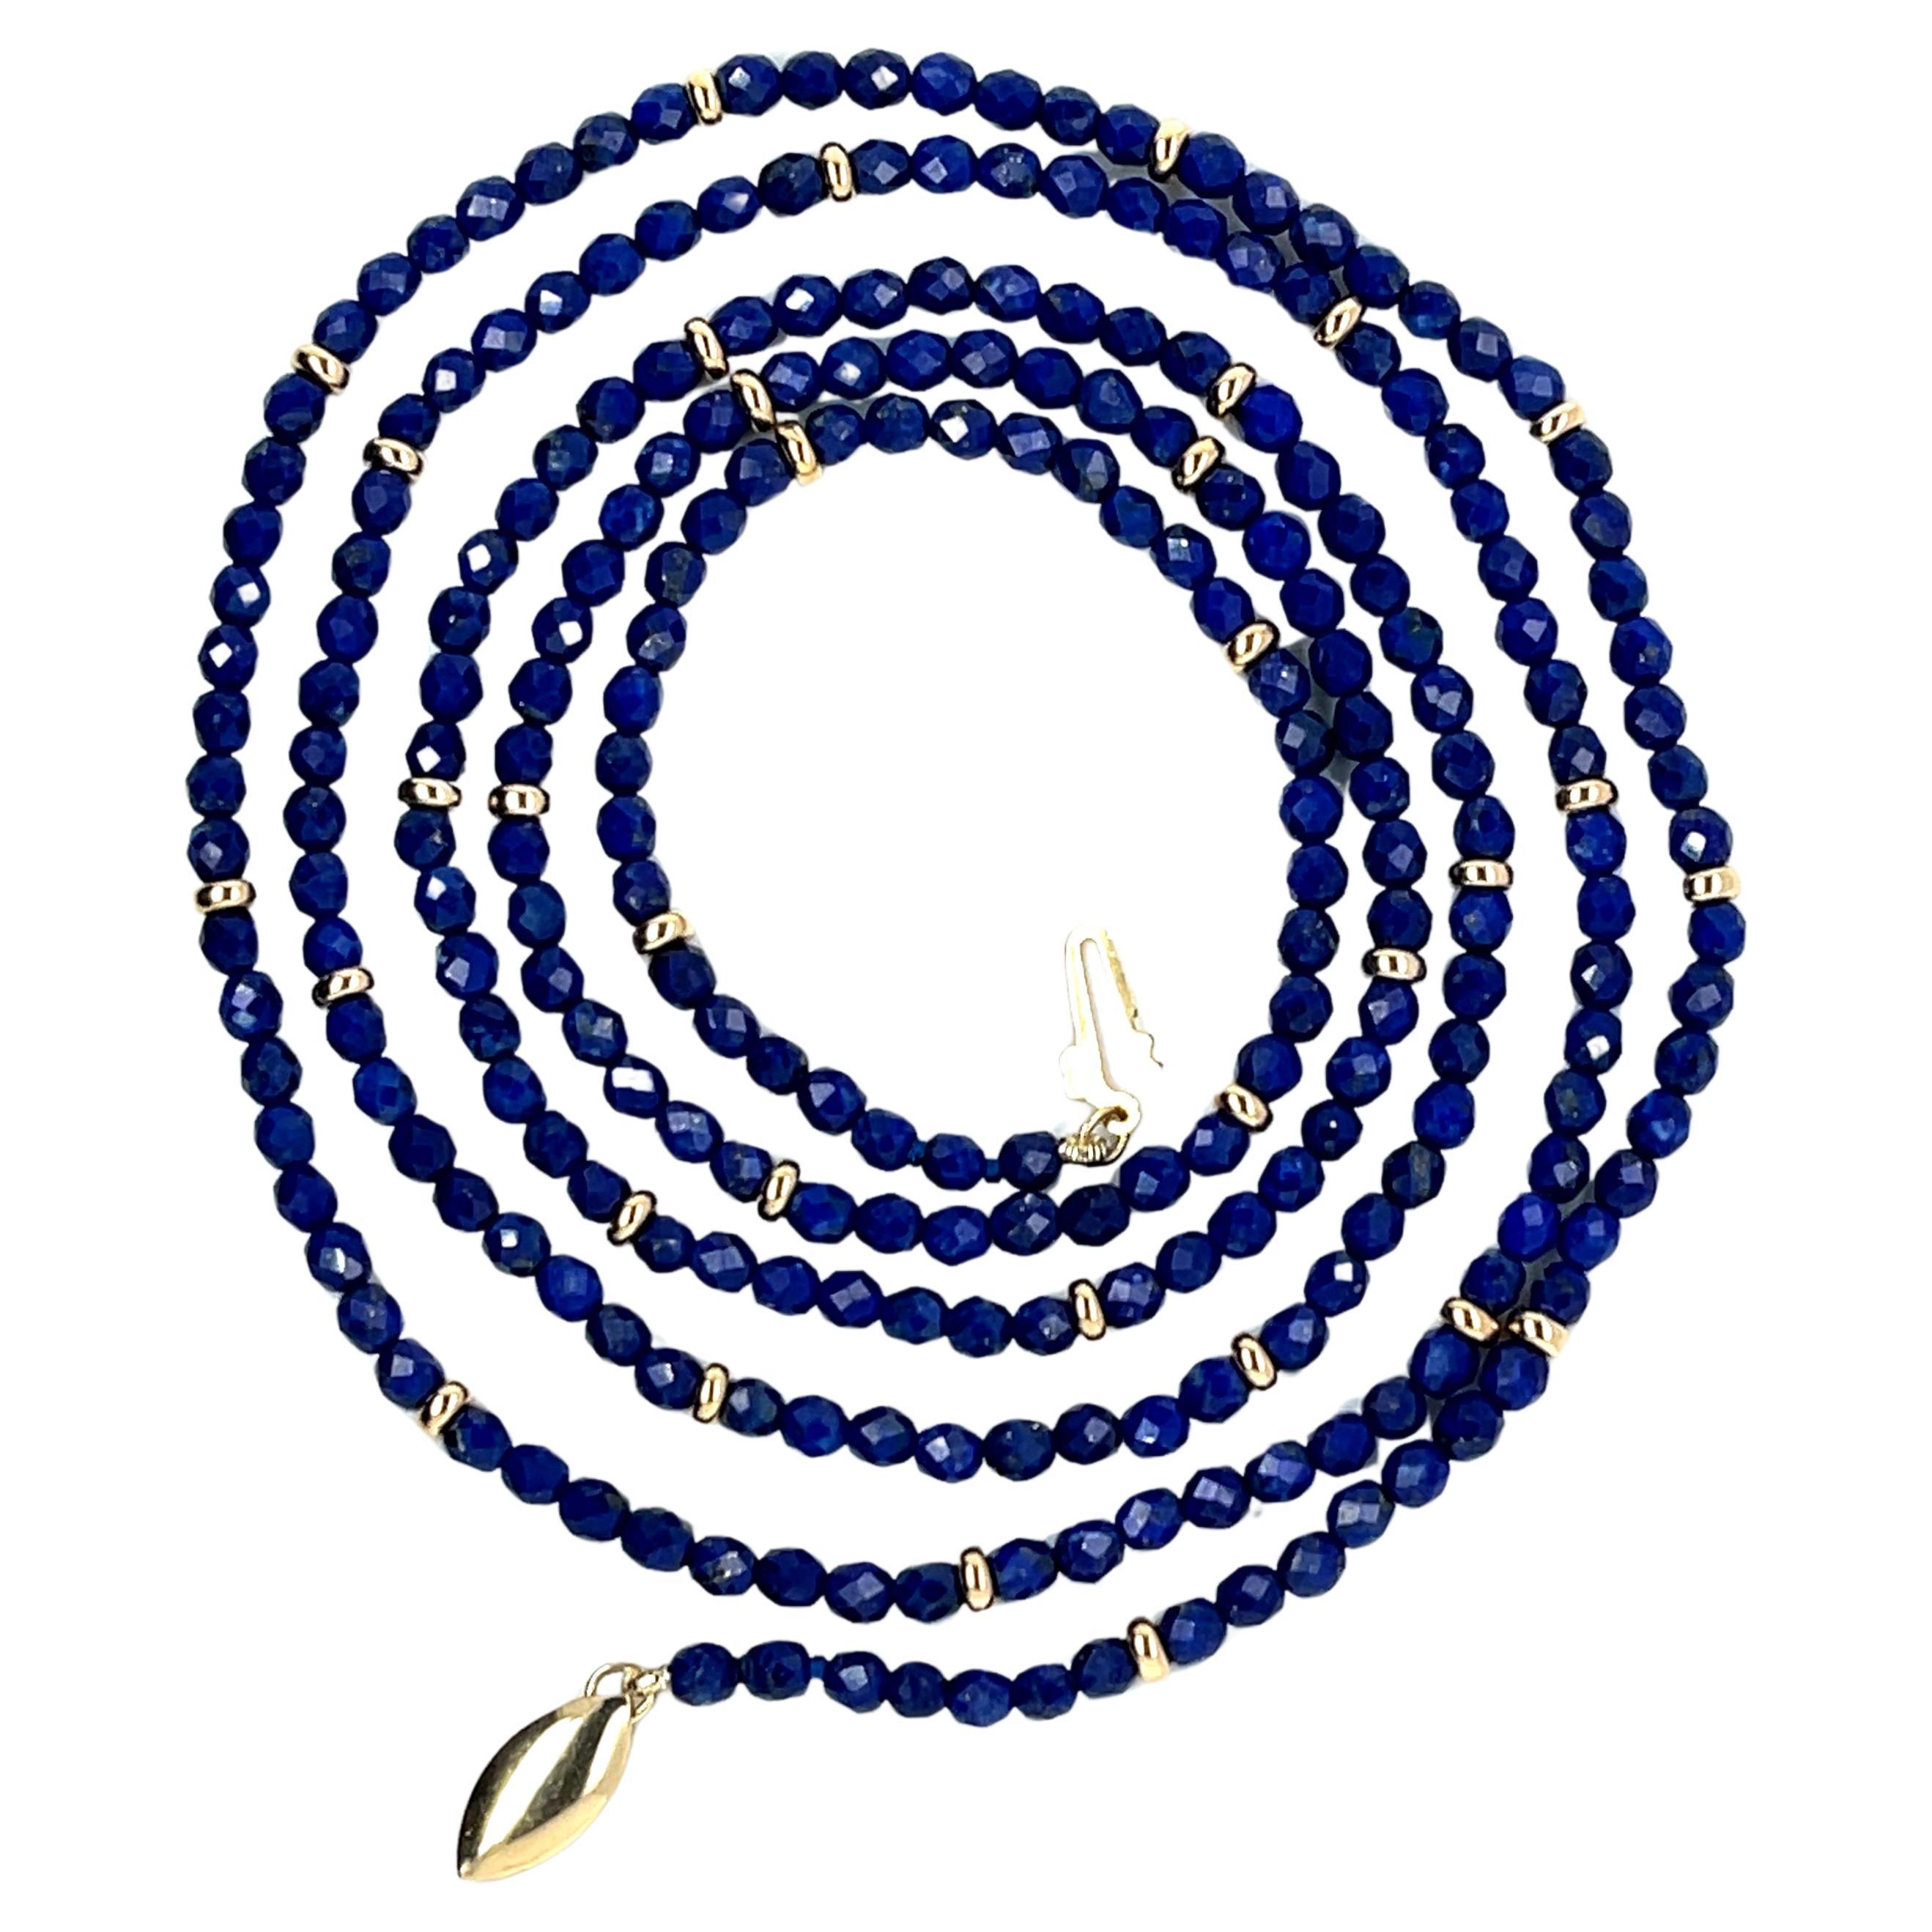 Faceted Lapis Bead Necklace with Yellow Gold Accents, 36 Inches For Sale